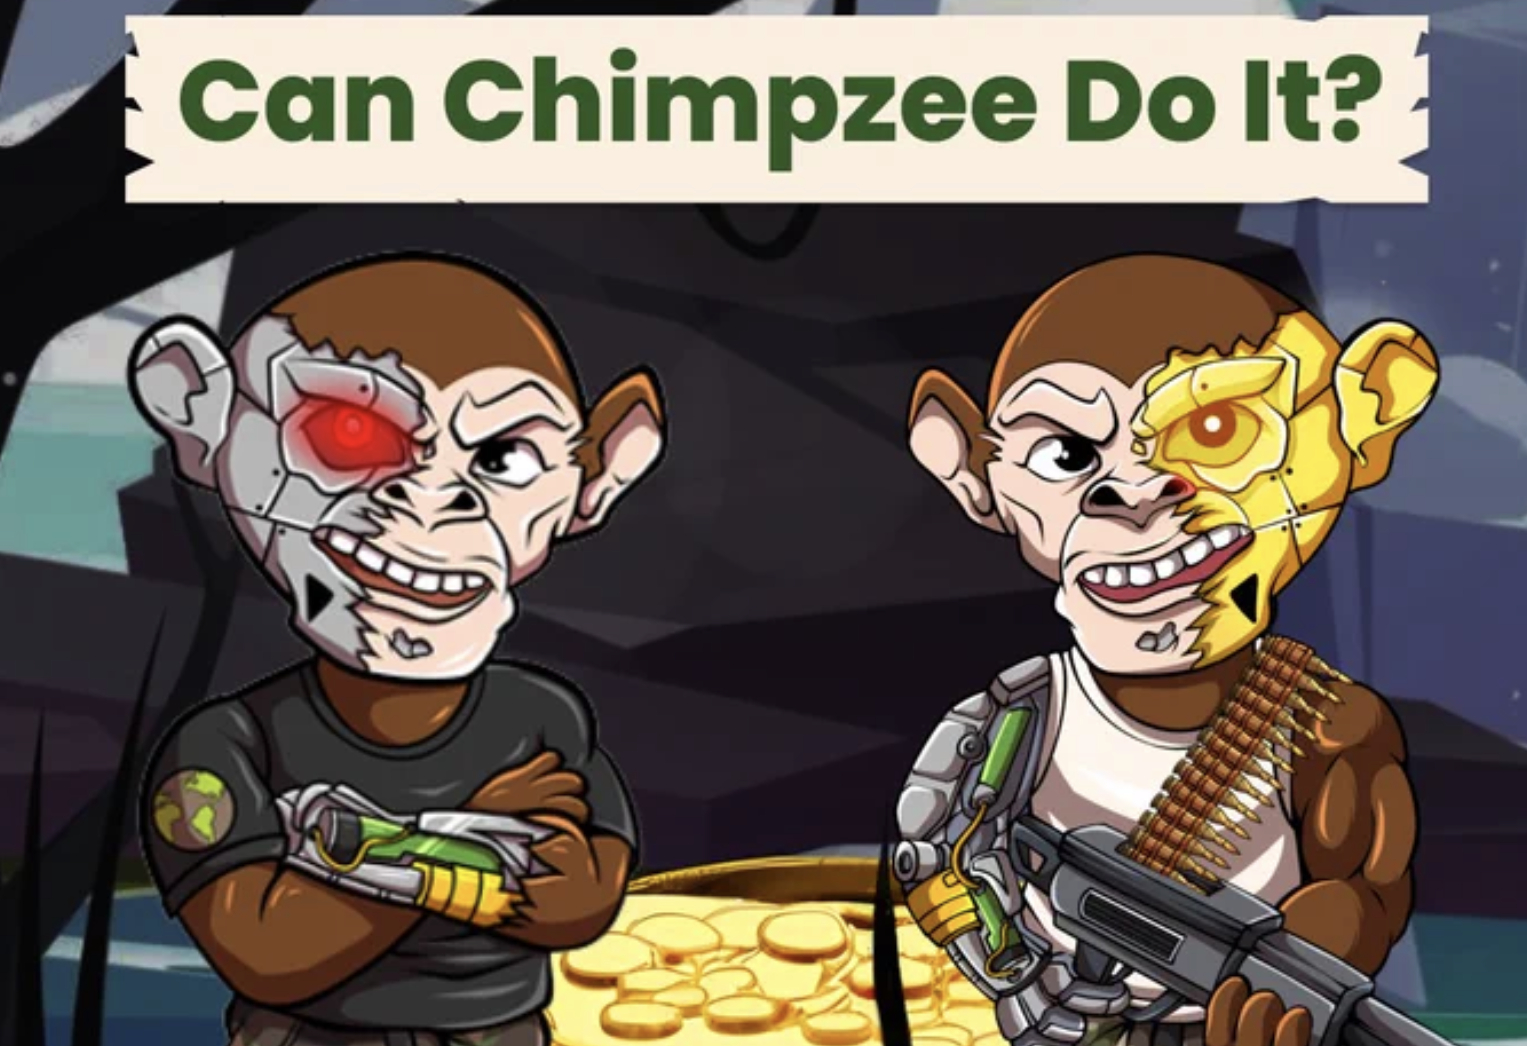 Fight Climate Change and Earn Rewards – Chimpzee’s New Sustainability Initiative is the Latest Crypto Sensation